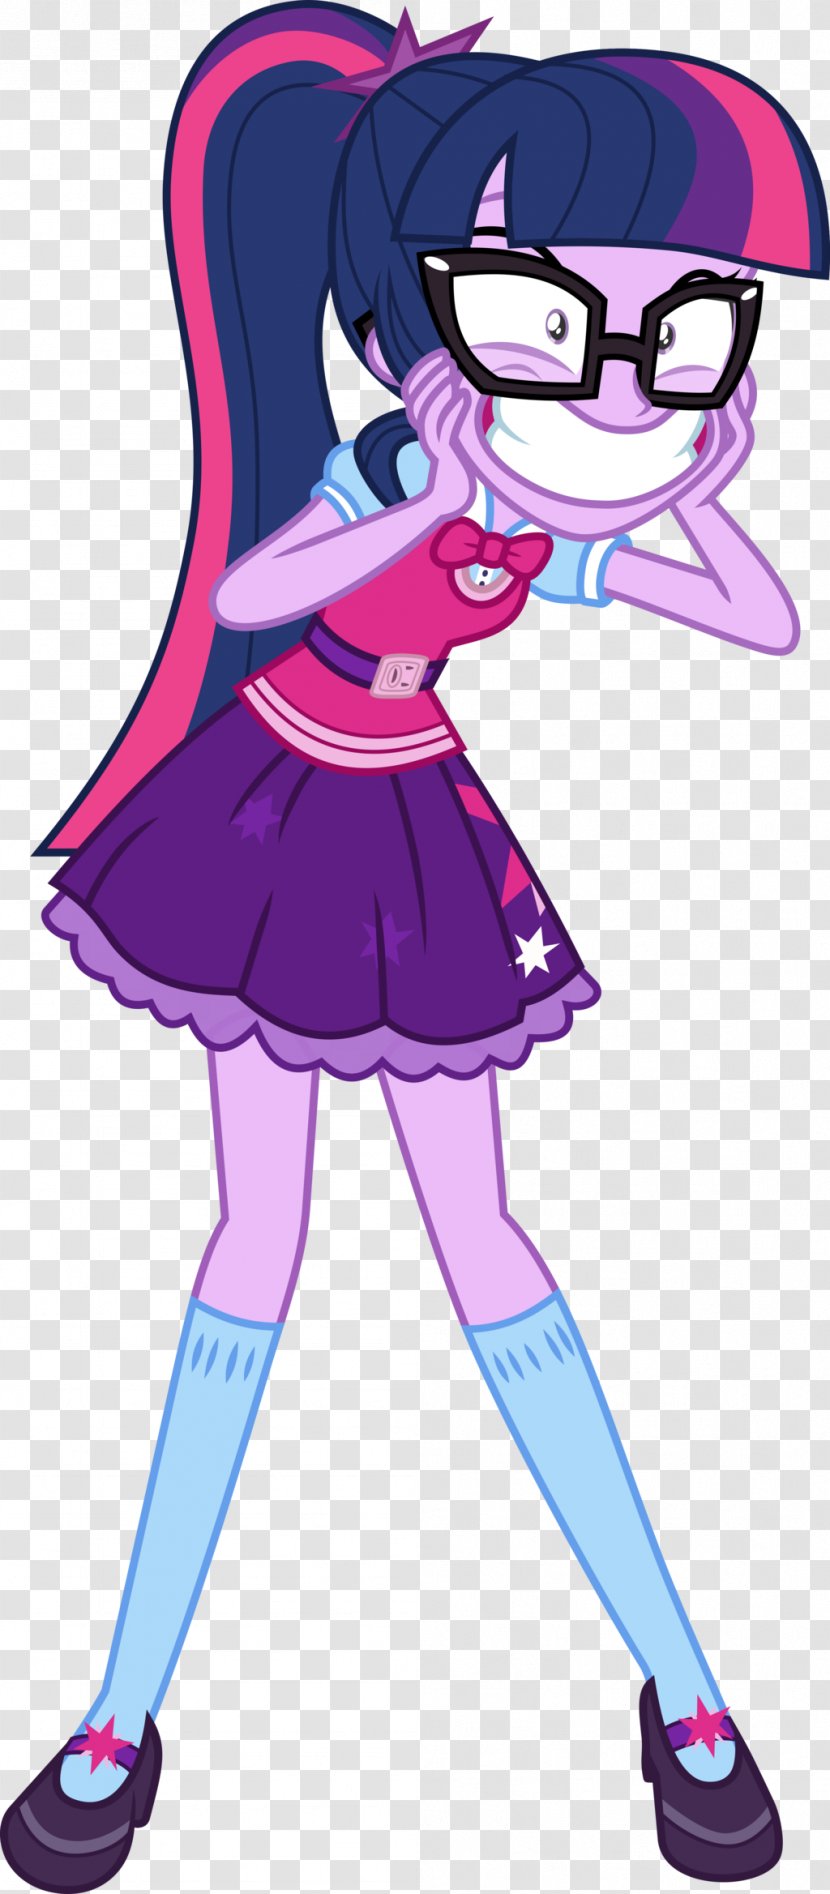 Twilight Sparkle Sunset Shimmer Rarity My Little Pony: Equestria Girls - Cartoon - Pony Transparent PNG